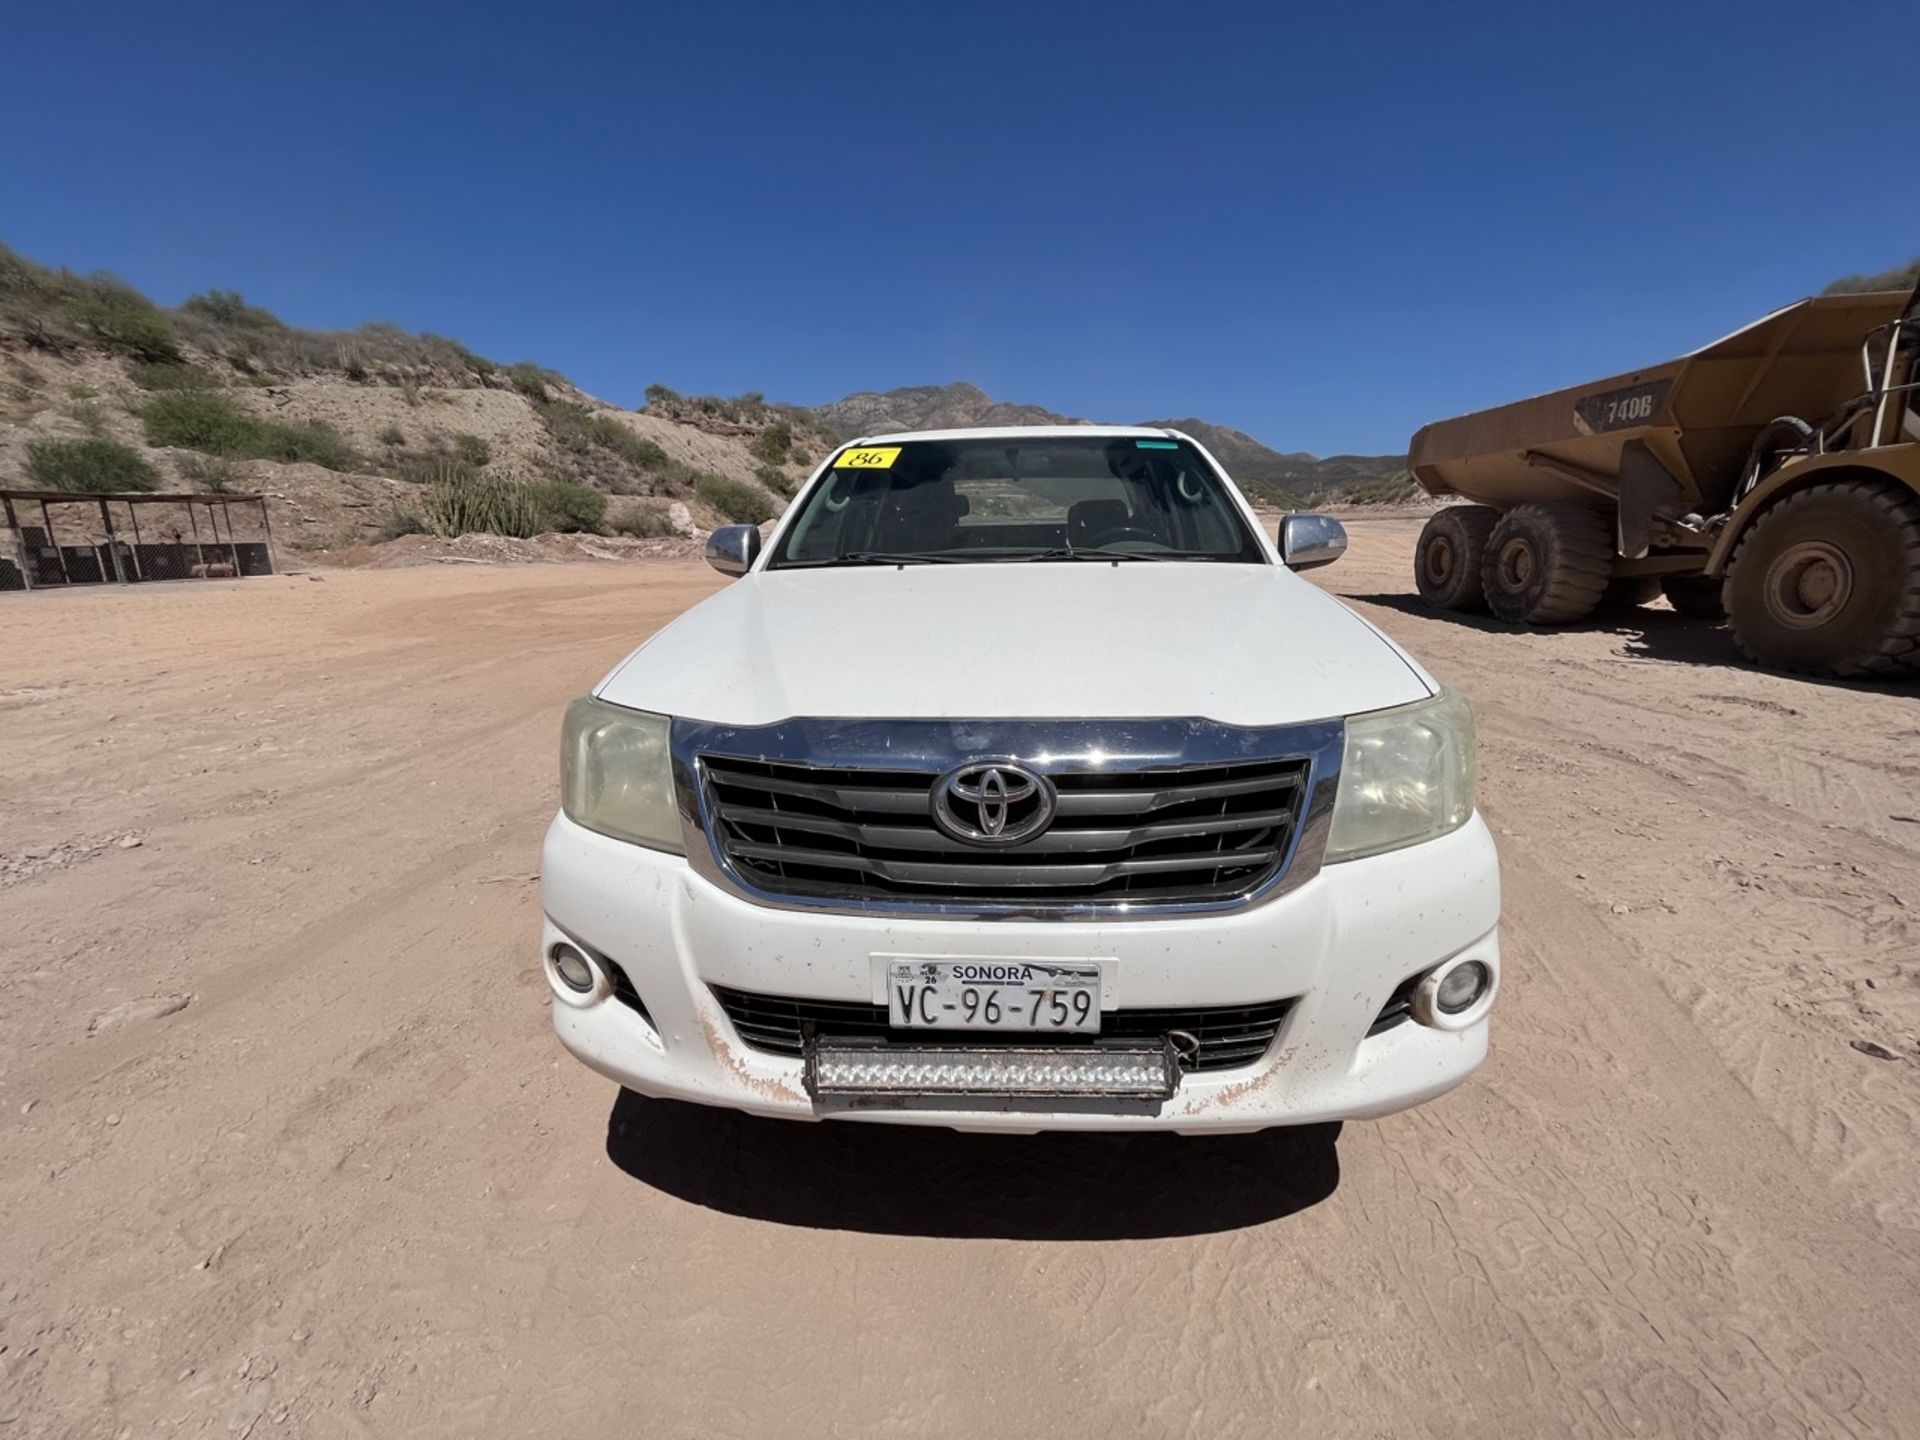 Vehicle Toyota Hilux, Pick Up Double cab white color, Serial MR0EX32G9F0263336, Model 2015, manual - Image 2 of 42